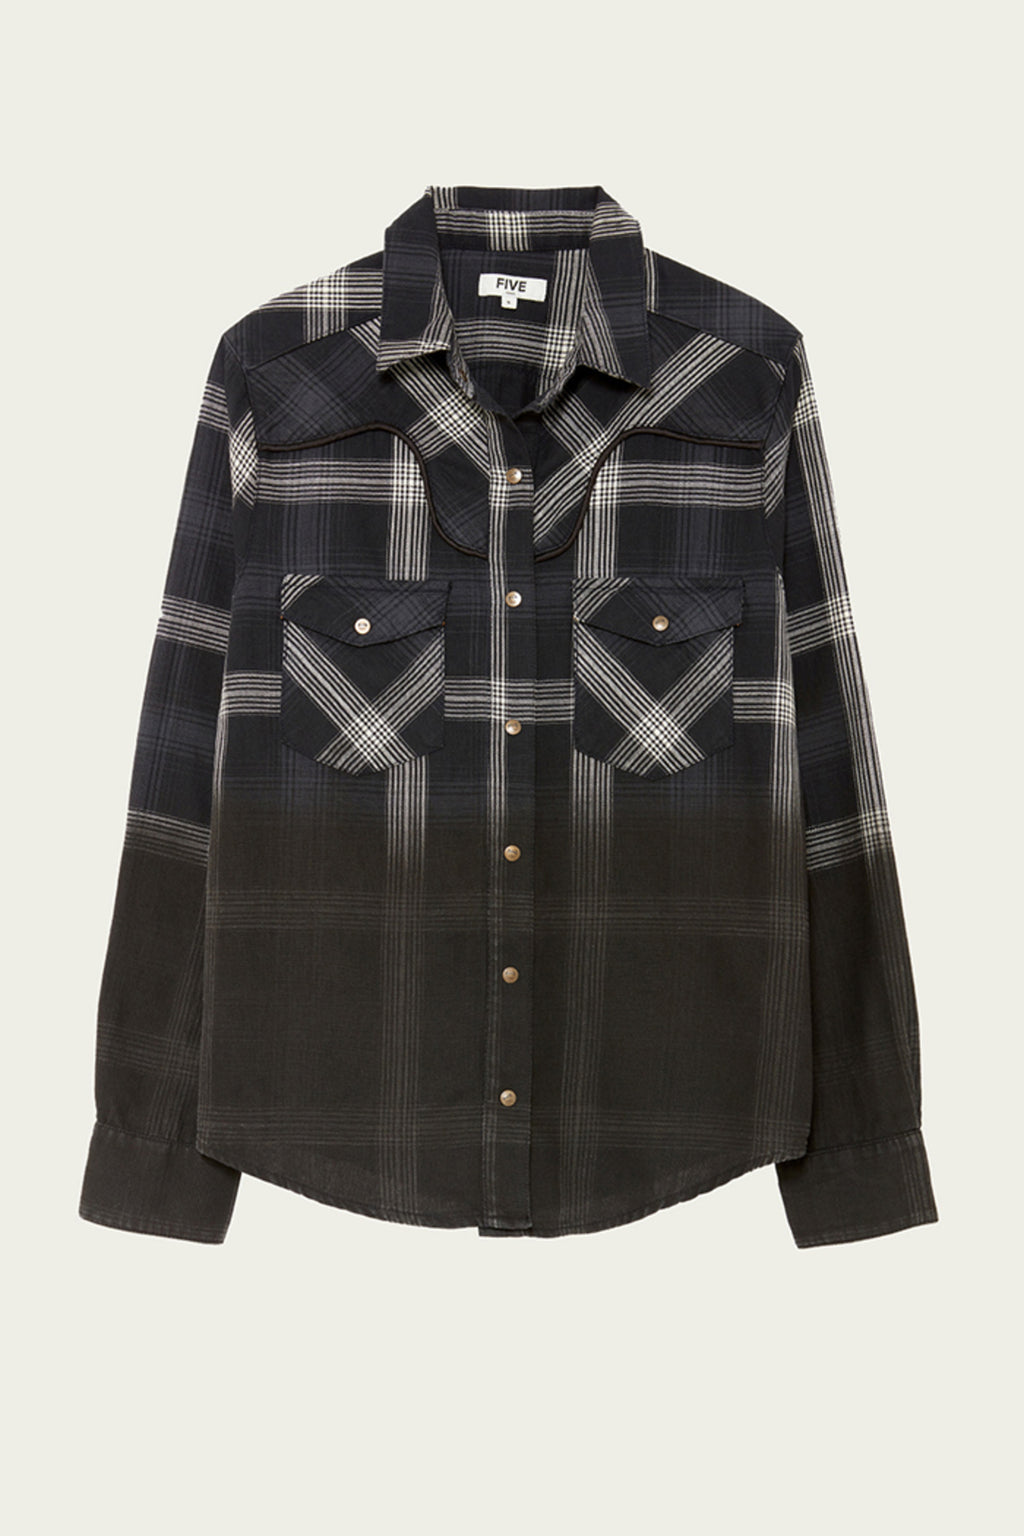 Five Jeans Shirt COME Plaid Check Dip Dyed Navy. - Sub Couture